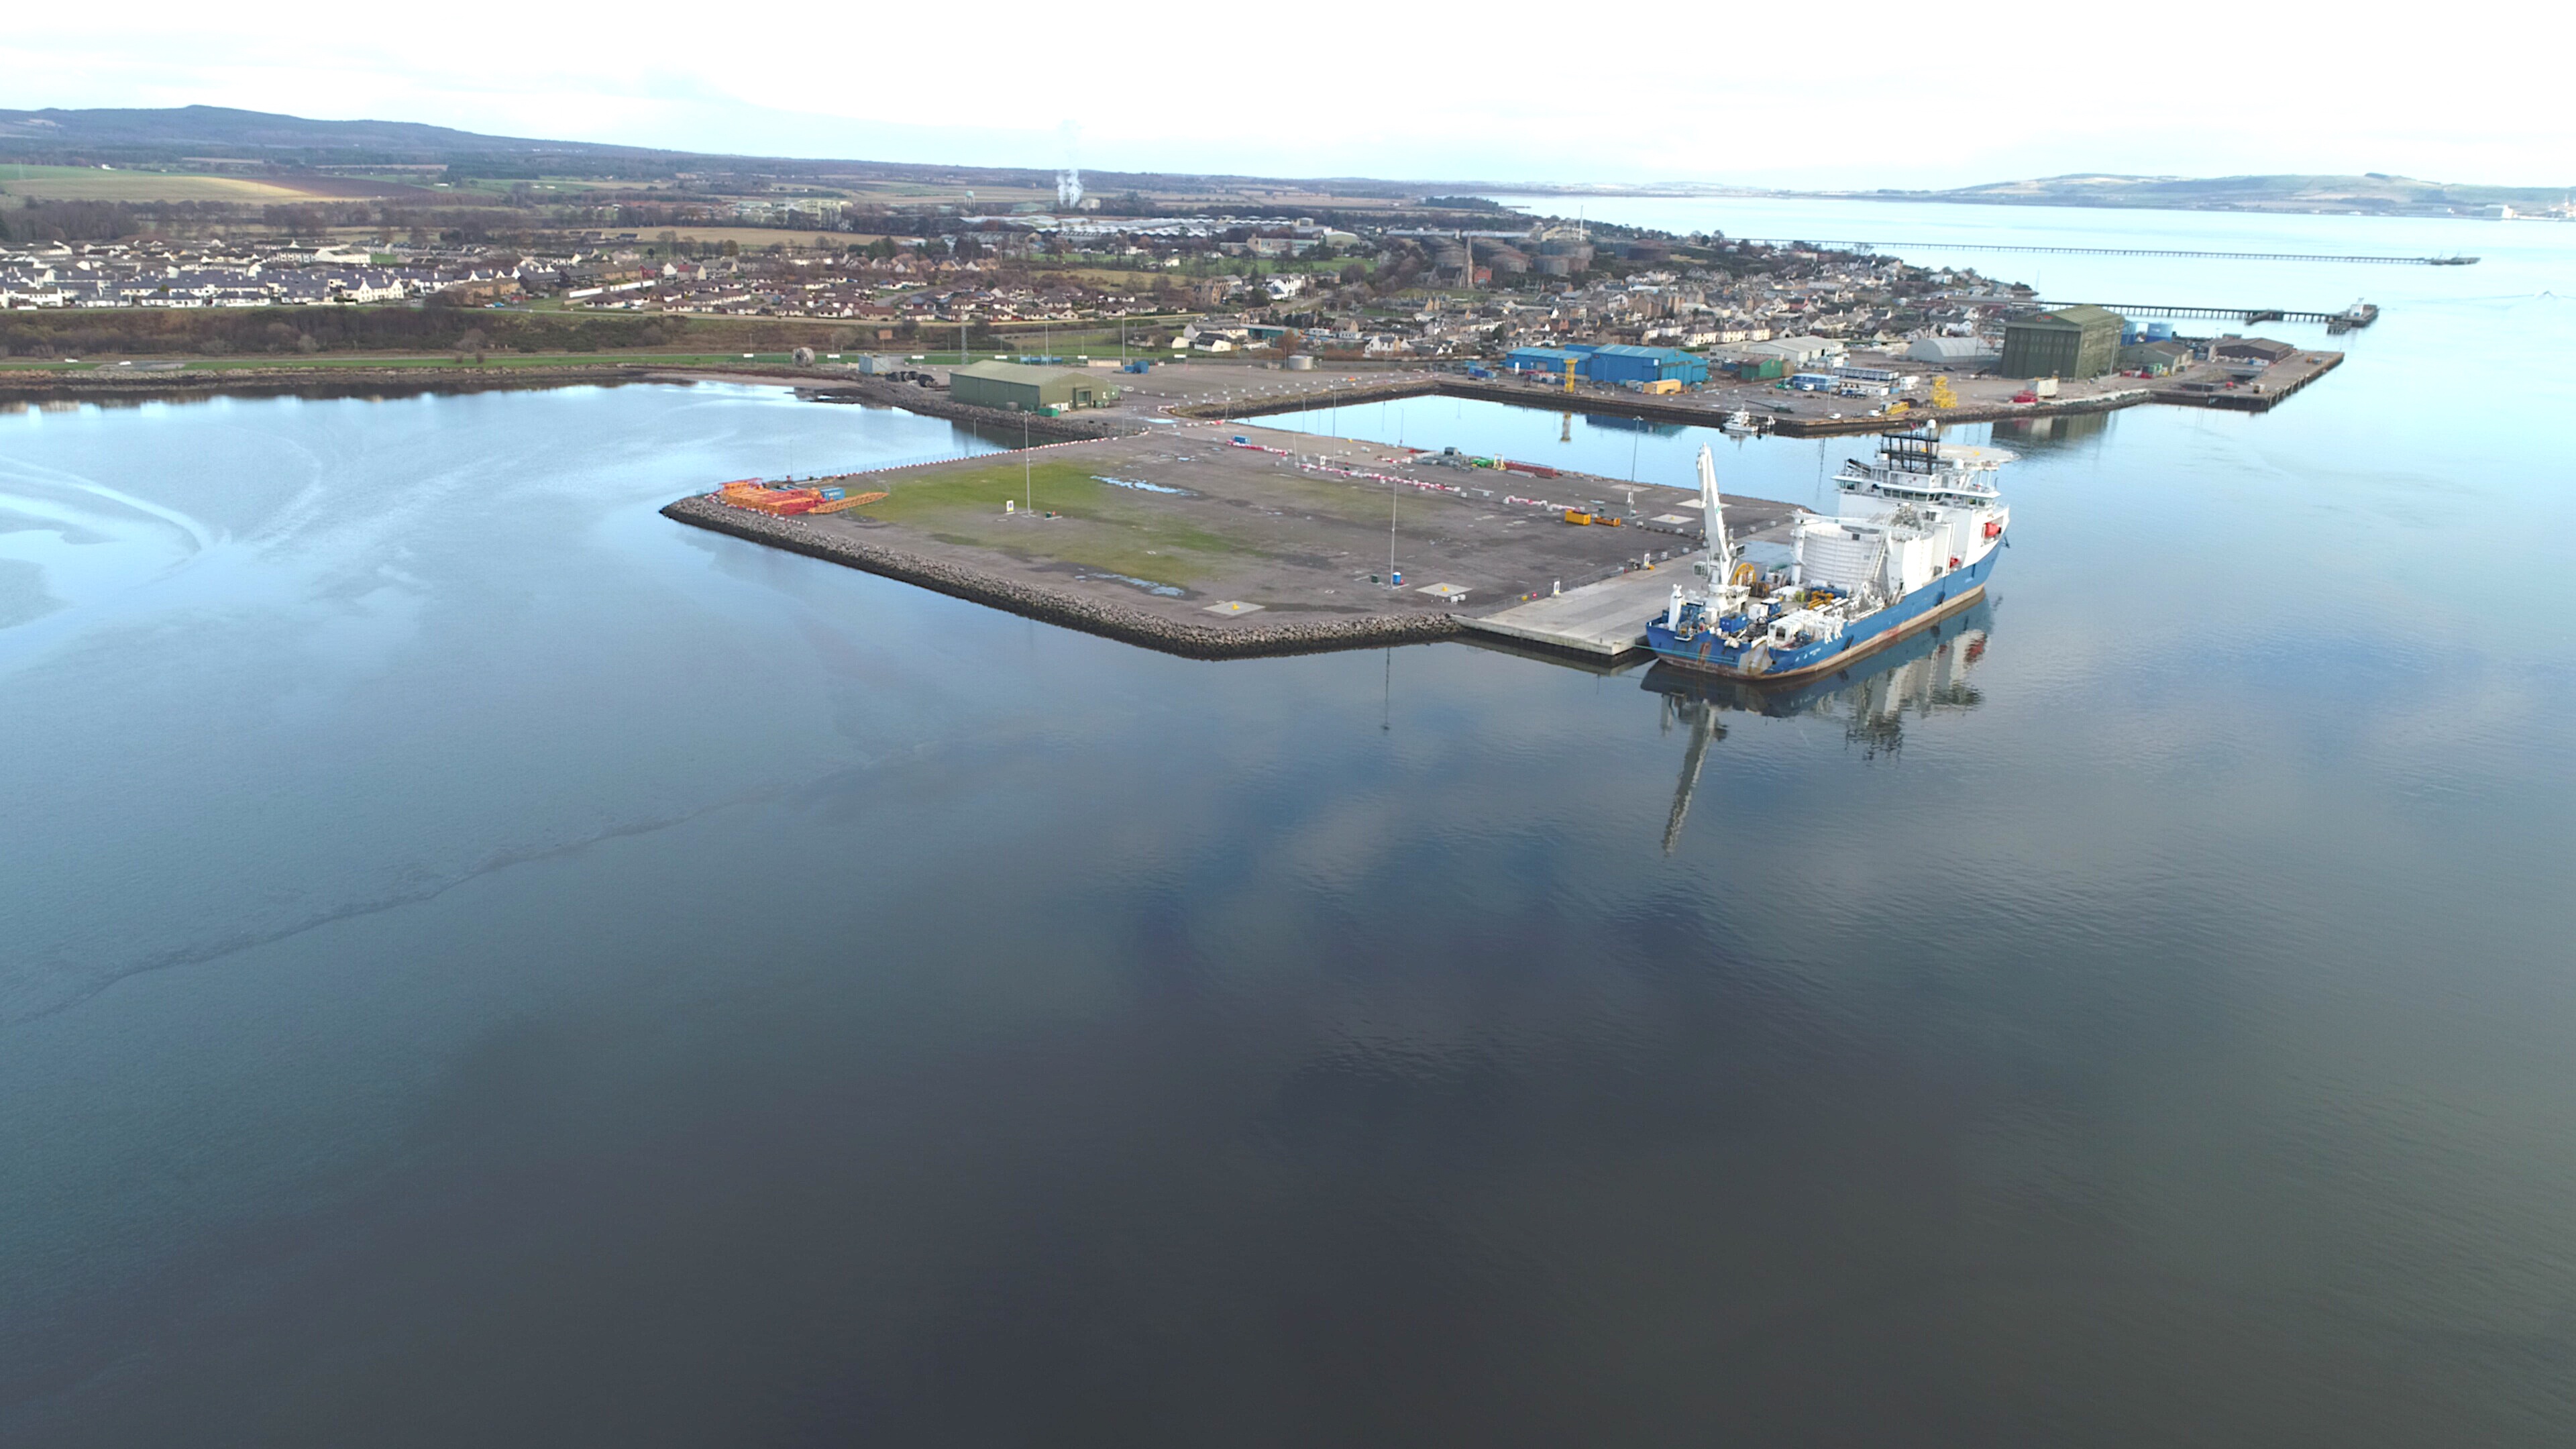 Highland port awards construction contract for £30m quayside expansion